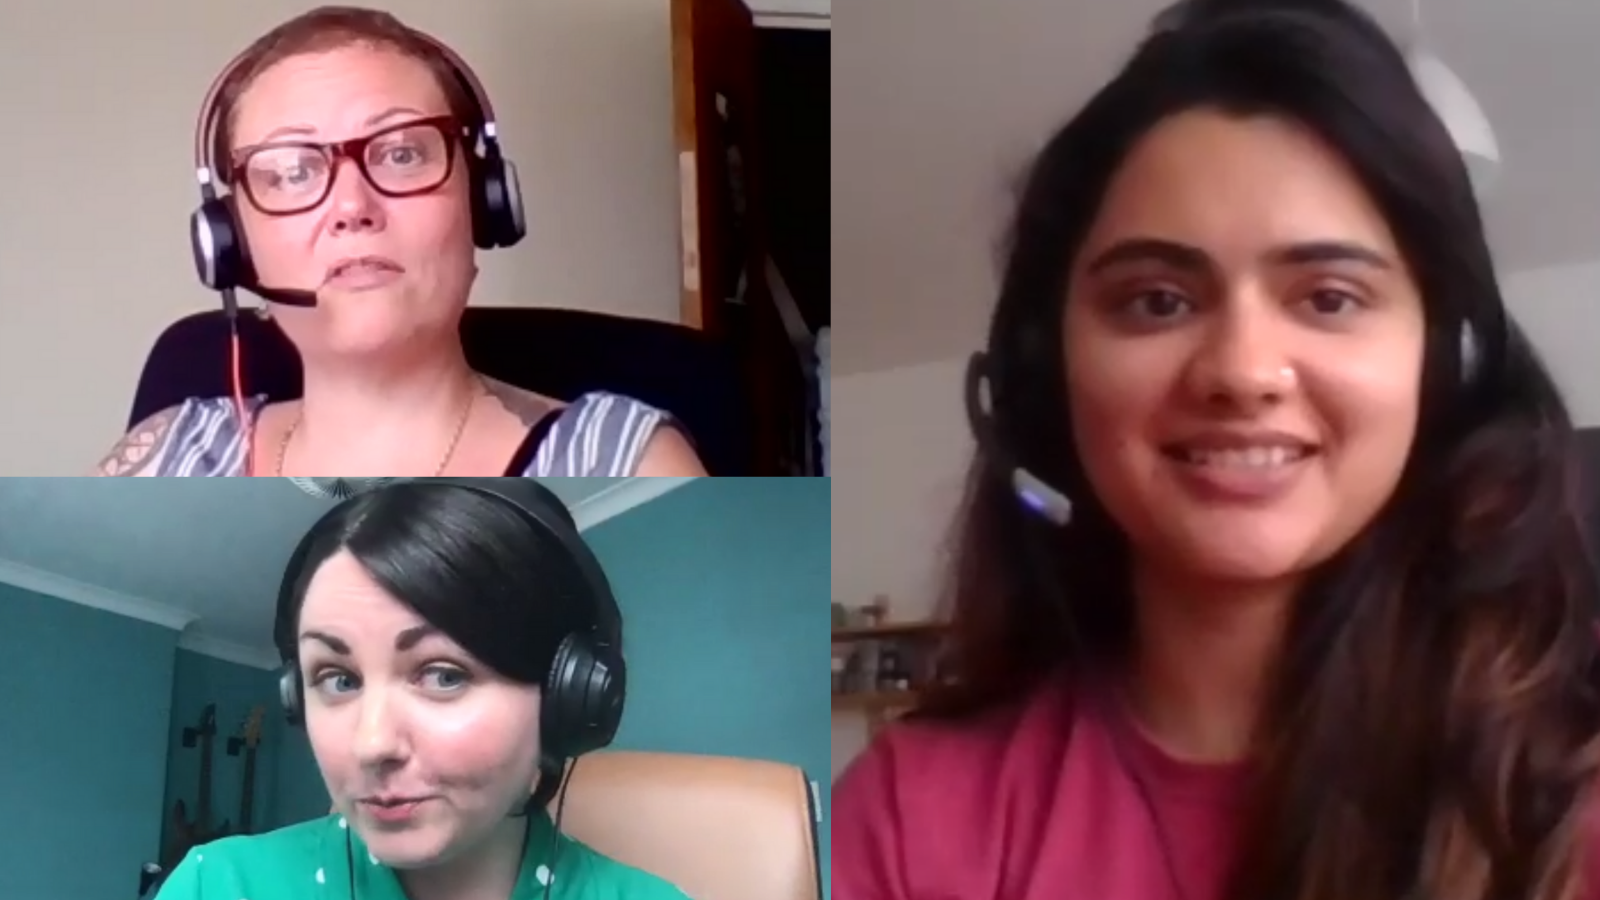 Podcast recording selfies from Claire Parry-Witchell, Kayleigh Mcleod & Prateeksha Pathak